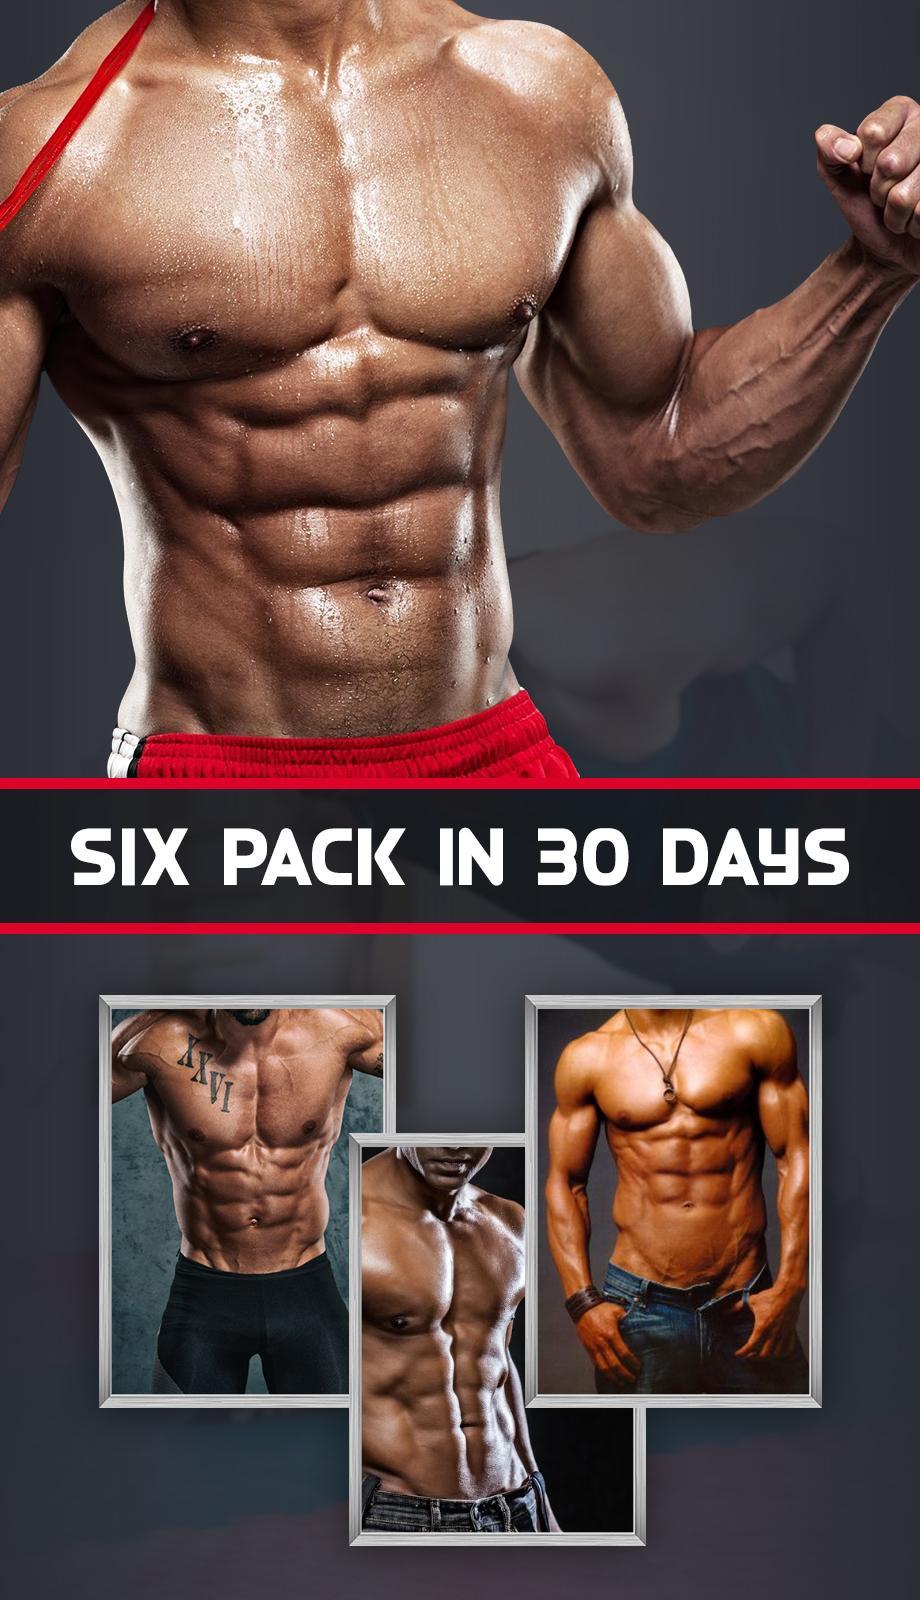 5 Day Six pack workout hd videos free download for Gym